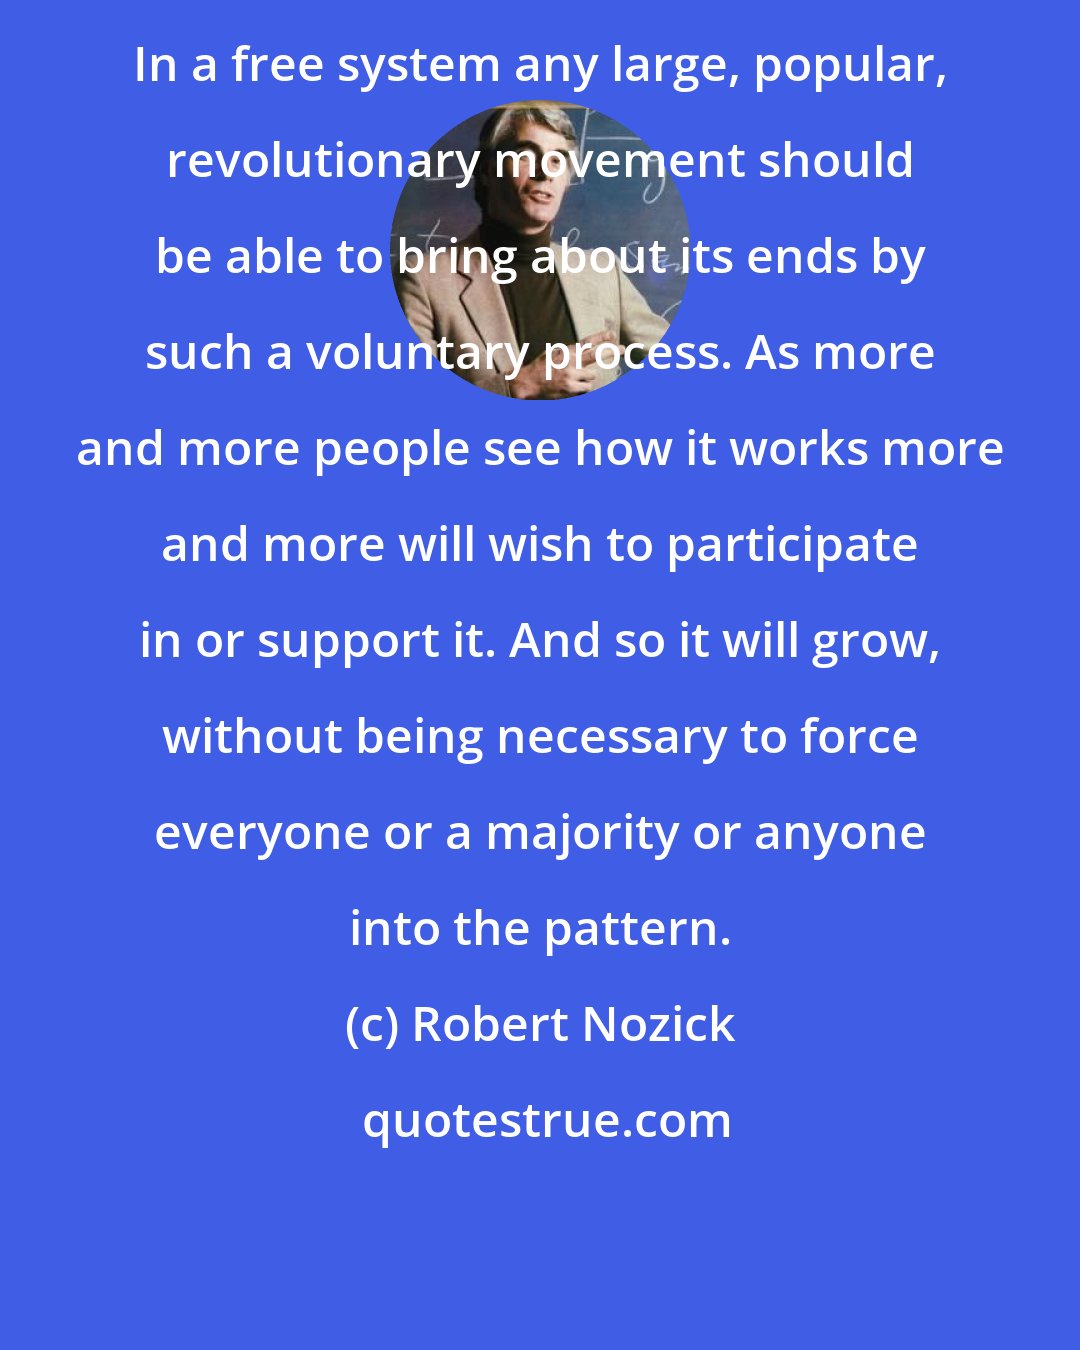 Robert Nozick: In a free system any large, popular, revolutionary movement should be able to bring about its ends by such a voluntary process. As more and more people see how it works more and more will wish to participate in or support it. And so it will grow, without being necessary to force everyone or a majority or anyone into the pattern.